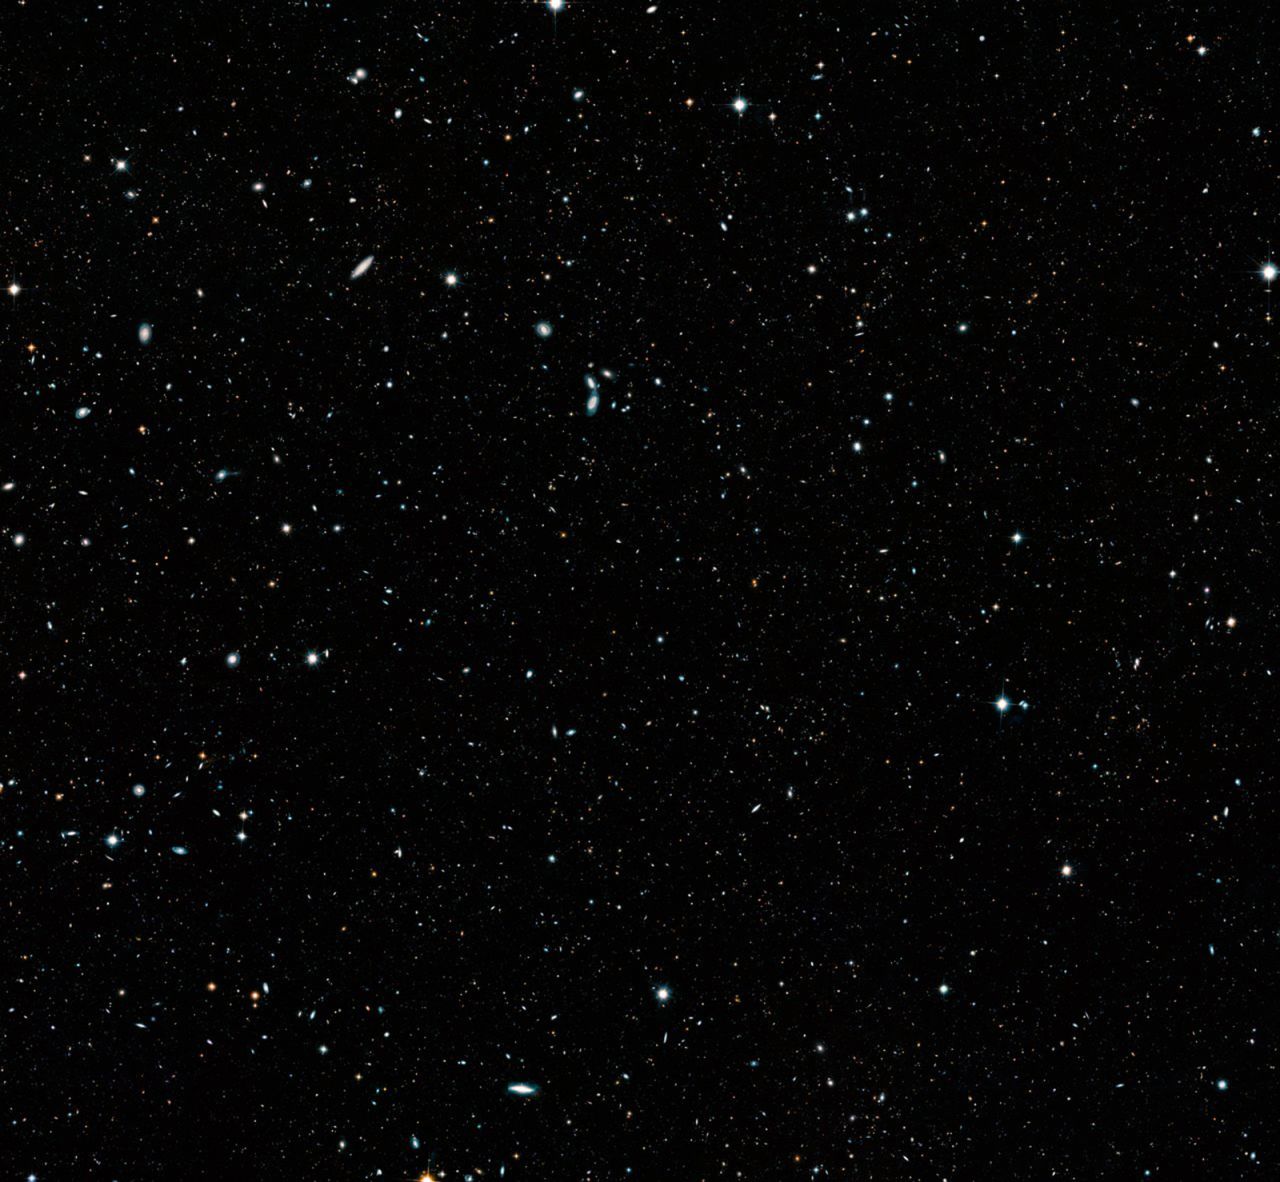 Astronomers developed a mosaic of the distant universe, called the Hubble Legacy Field, that documents 16 years of observations from the Hubble Space Telescope. The image contains 200,000 galaxies that stretch back through 13.3 billion years of time to just 500 million years after the Big Bang. 